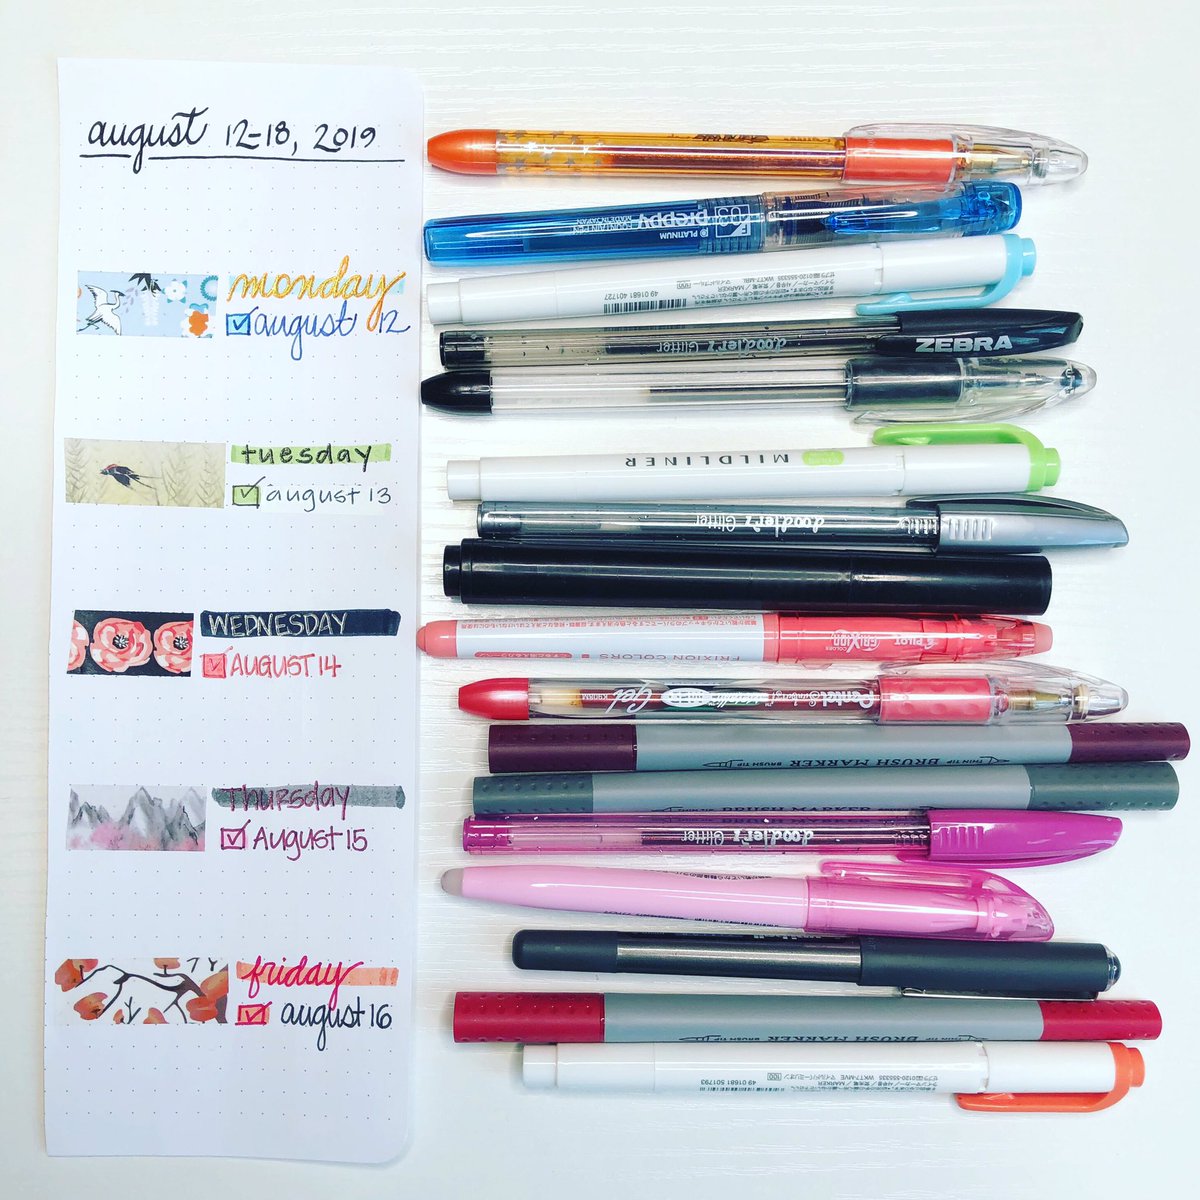 I love #planning ahead ... picking out a daily #colorpalette, selecting just the perfect #pens and #highlighters to match the #washi tapeday divider. 
So #soothing. 
#bujofuyo #bujo #bujoinspiration #planning #plannerinspiration #planner #weeklyplanning #markers #color